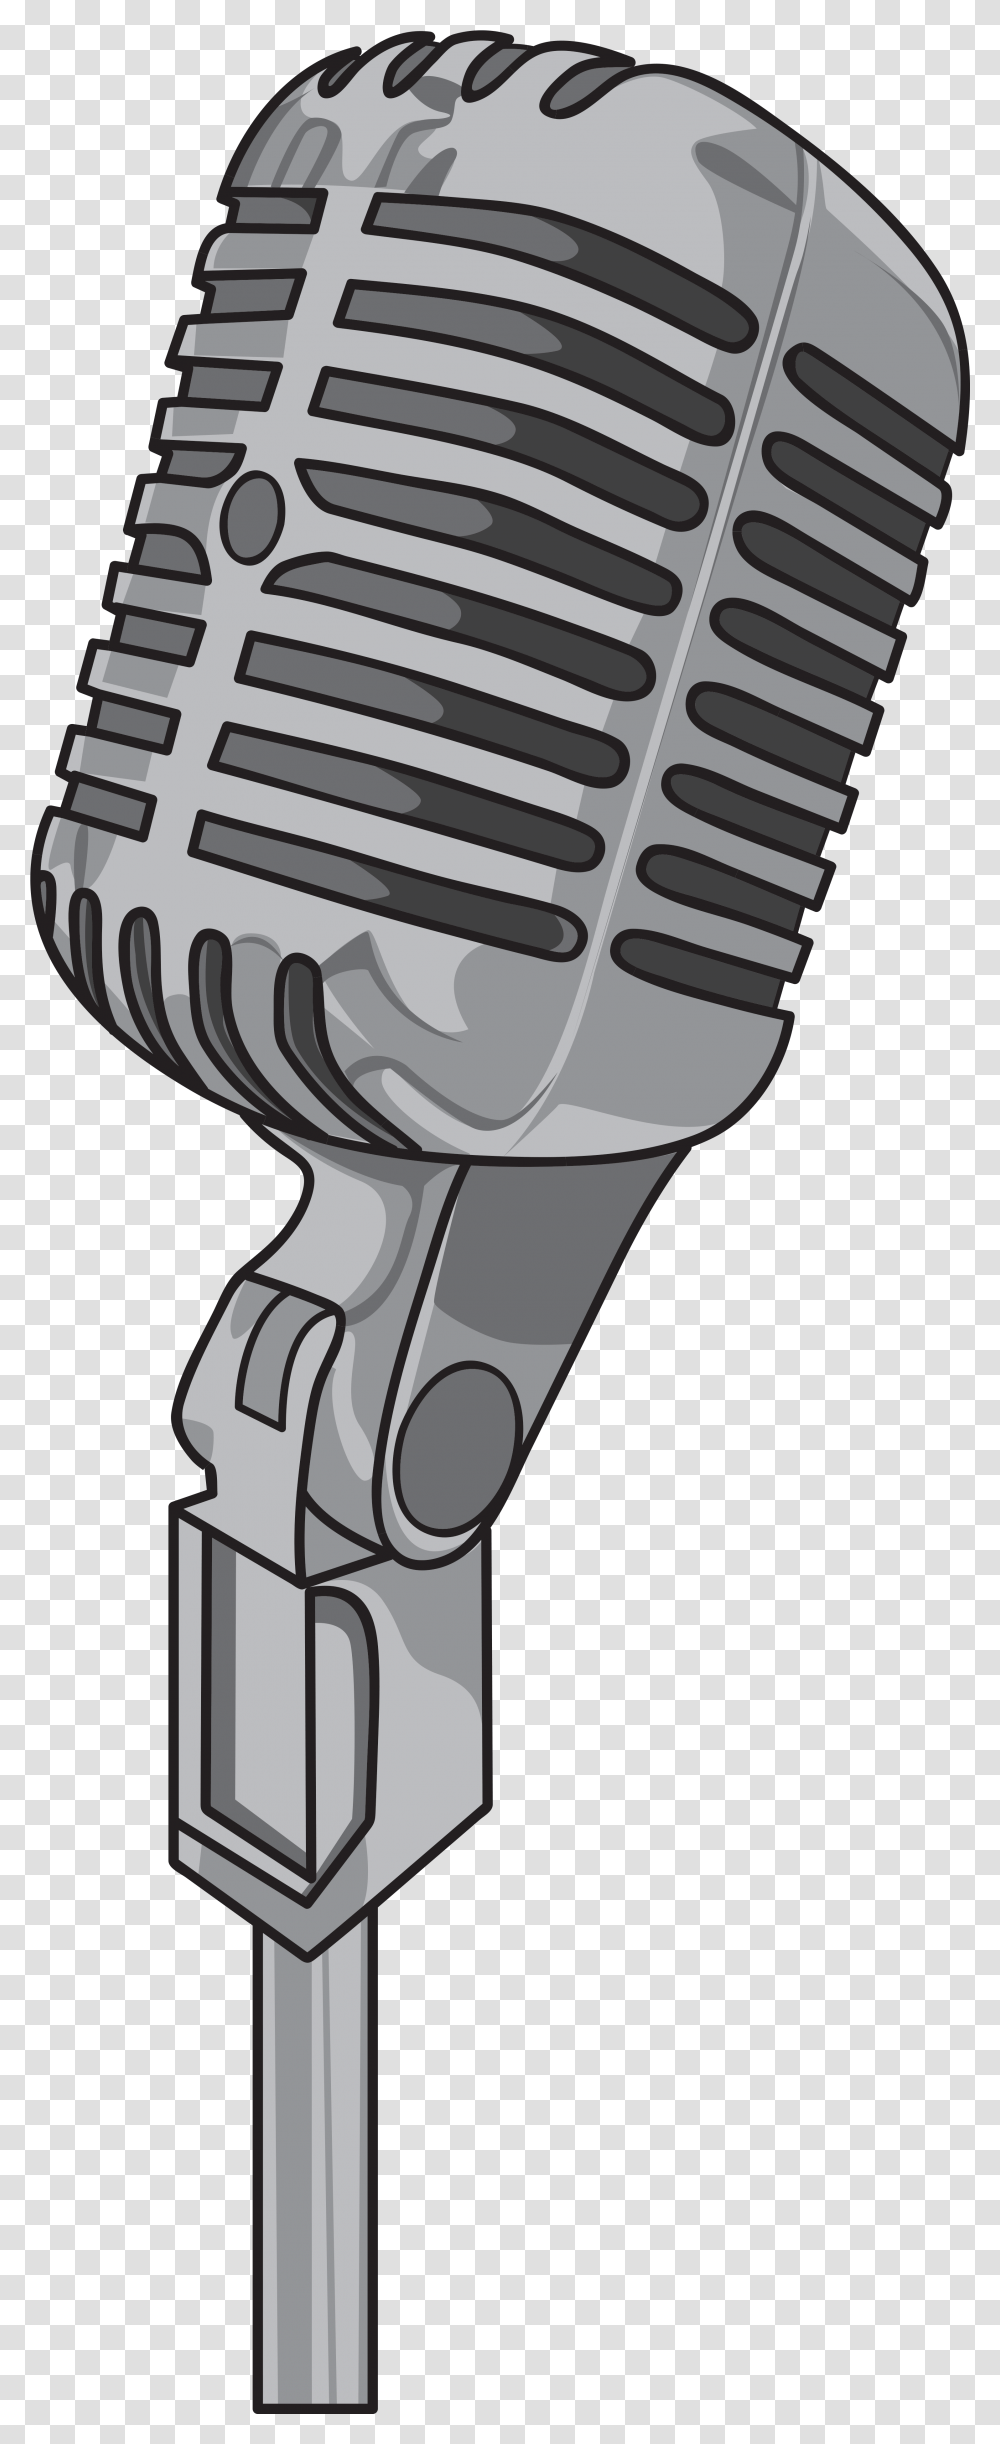 Download Microphone Vector Vintage, Electrical Device, Blow Dryer, Appliance, Hair Drier Transparent Png